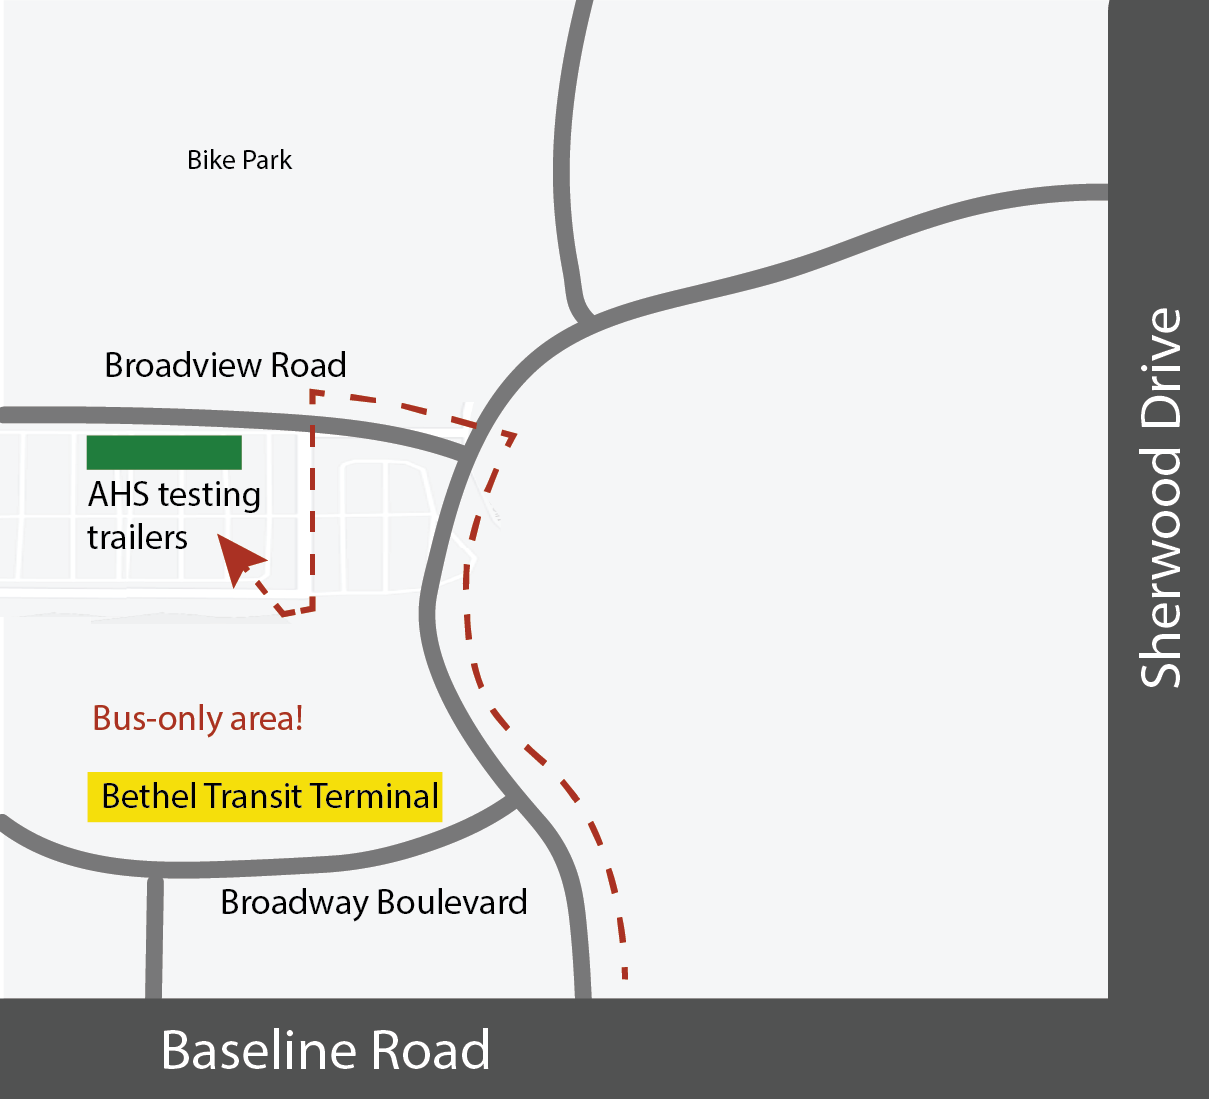 Testing site is located north of the transit terminal,  best access is through Broadview Road, the road that runs parallel to baseline, but north of the terminal